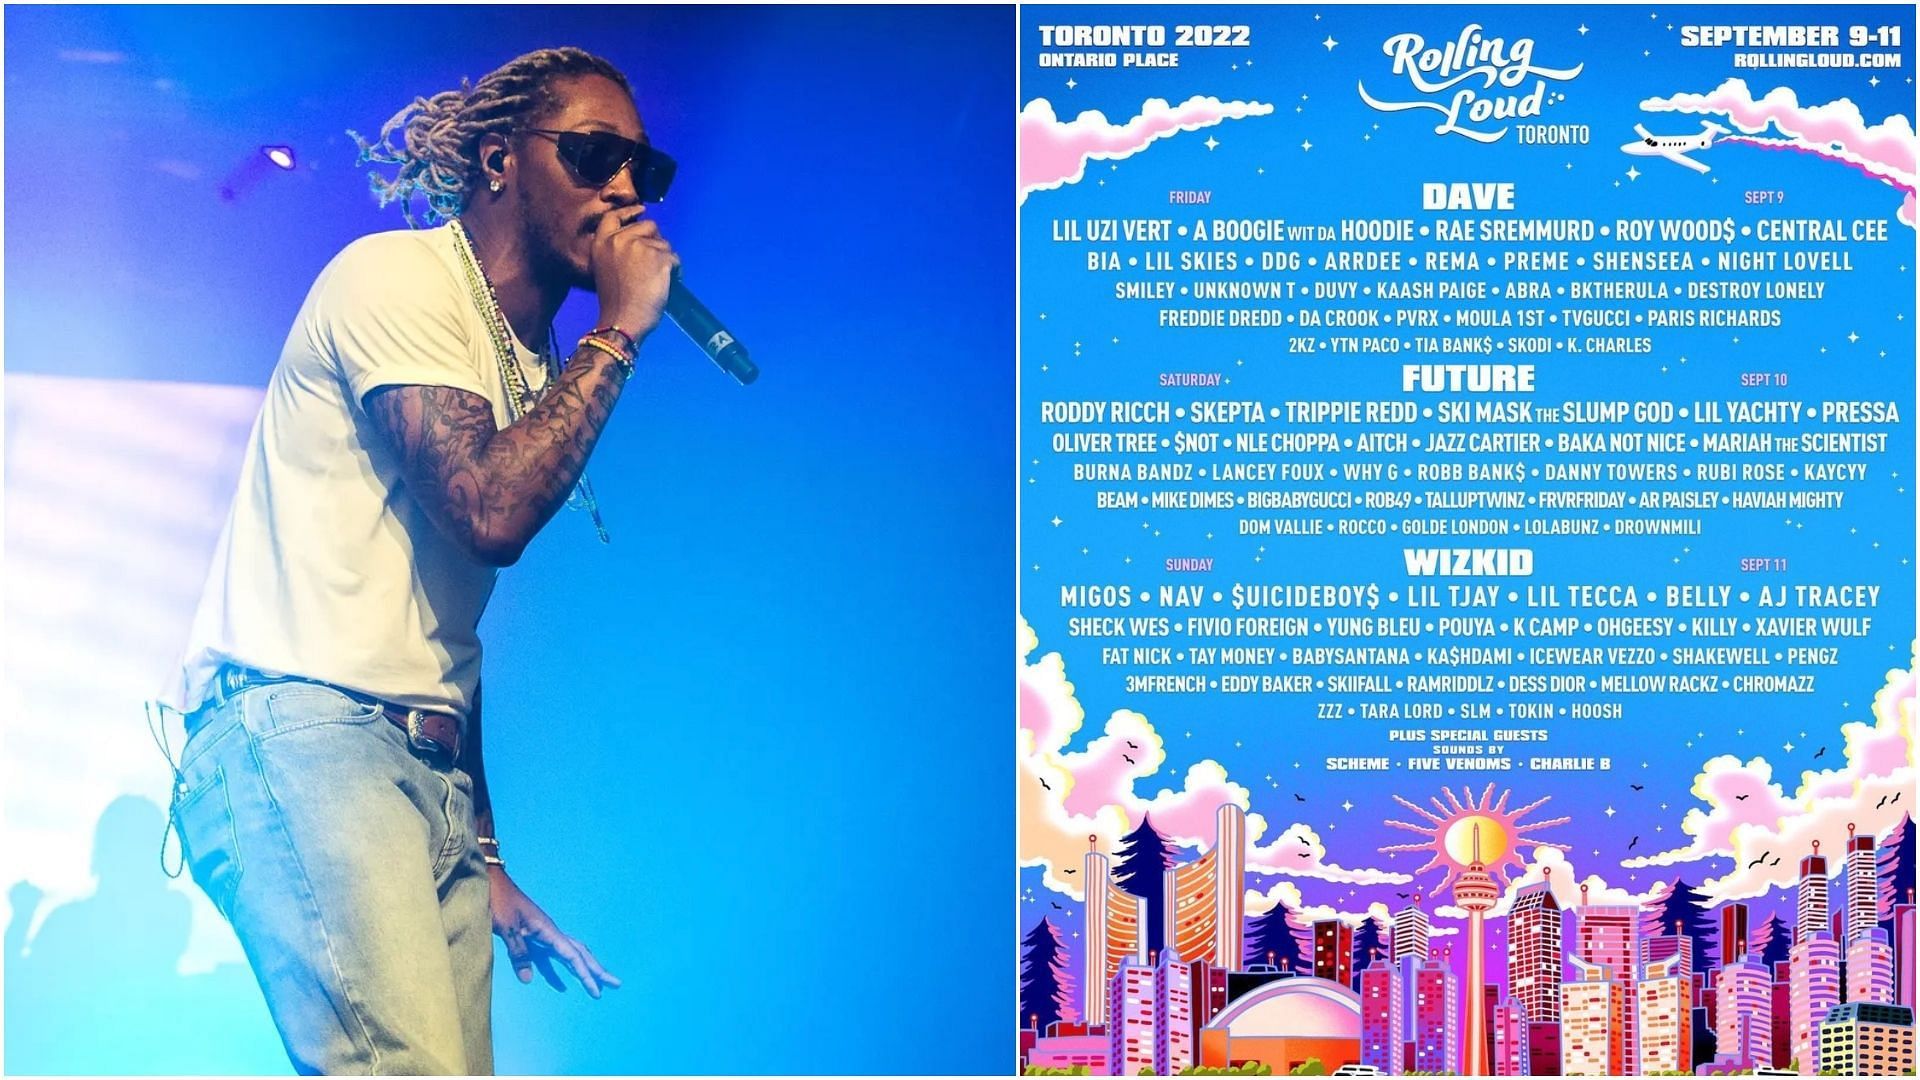 Rolling Loud Toronto 2022 Lineup, tickets, where to buy, dates and more